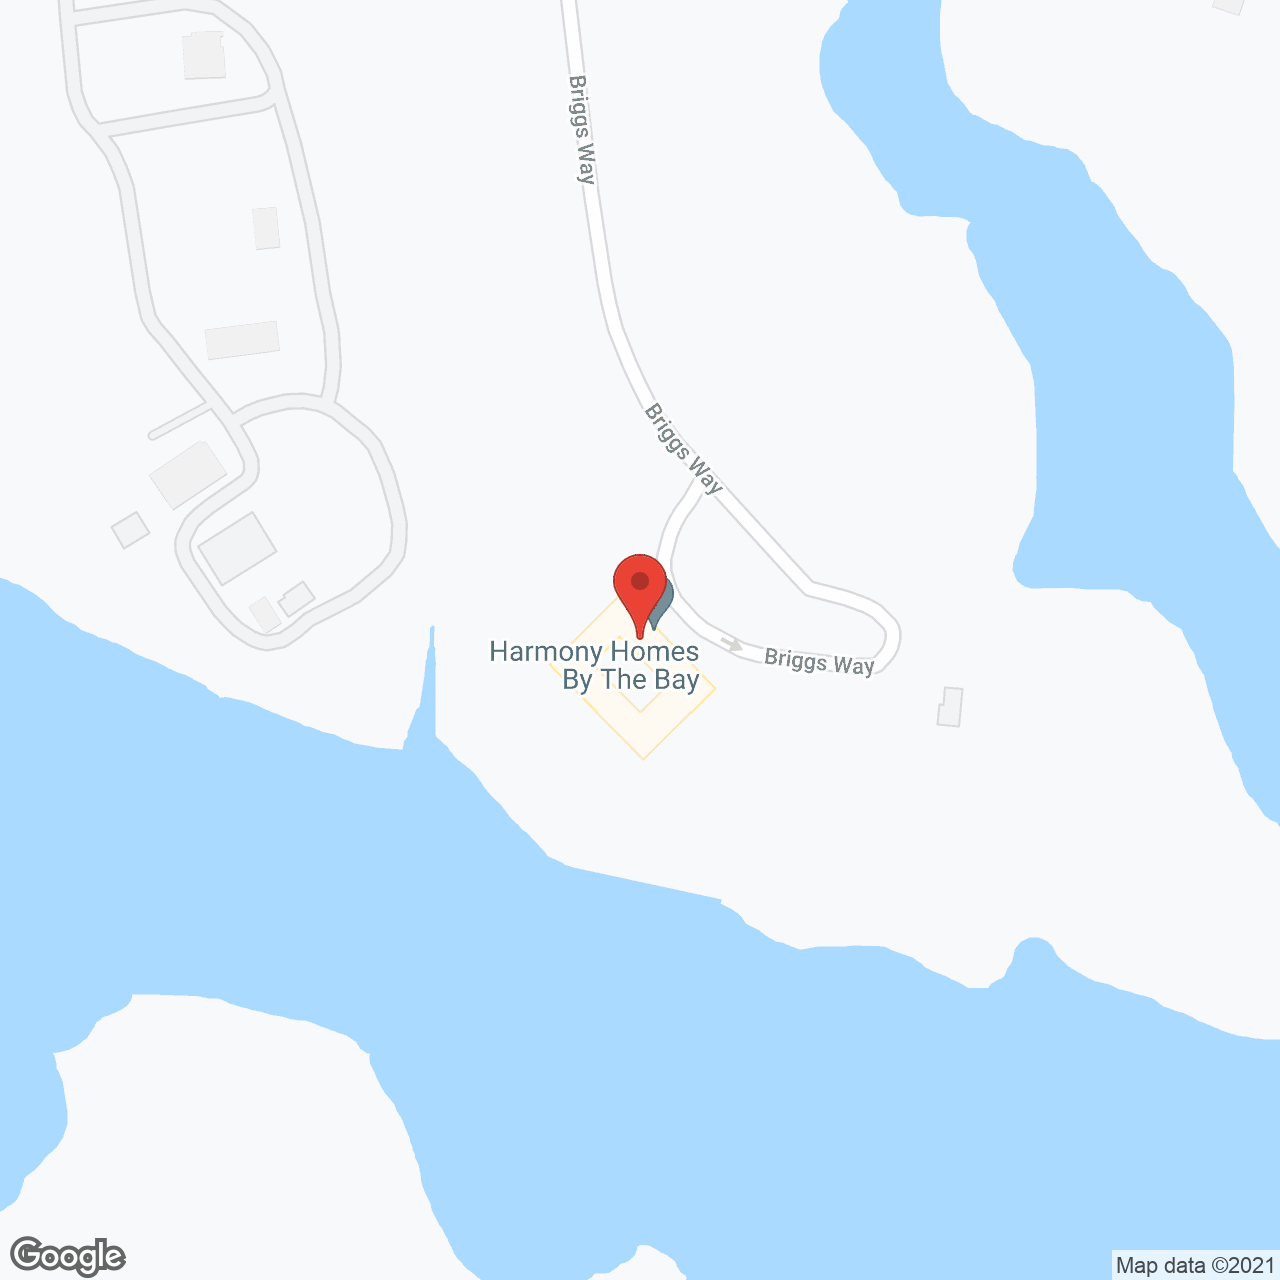 Harmony Homes By the Bay in google map